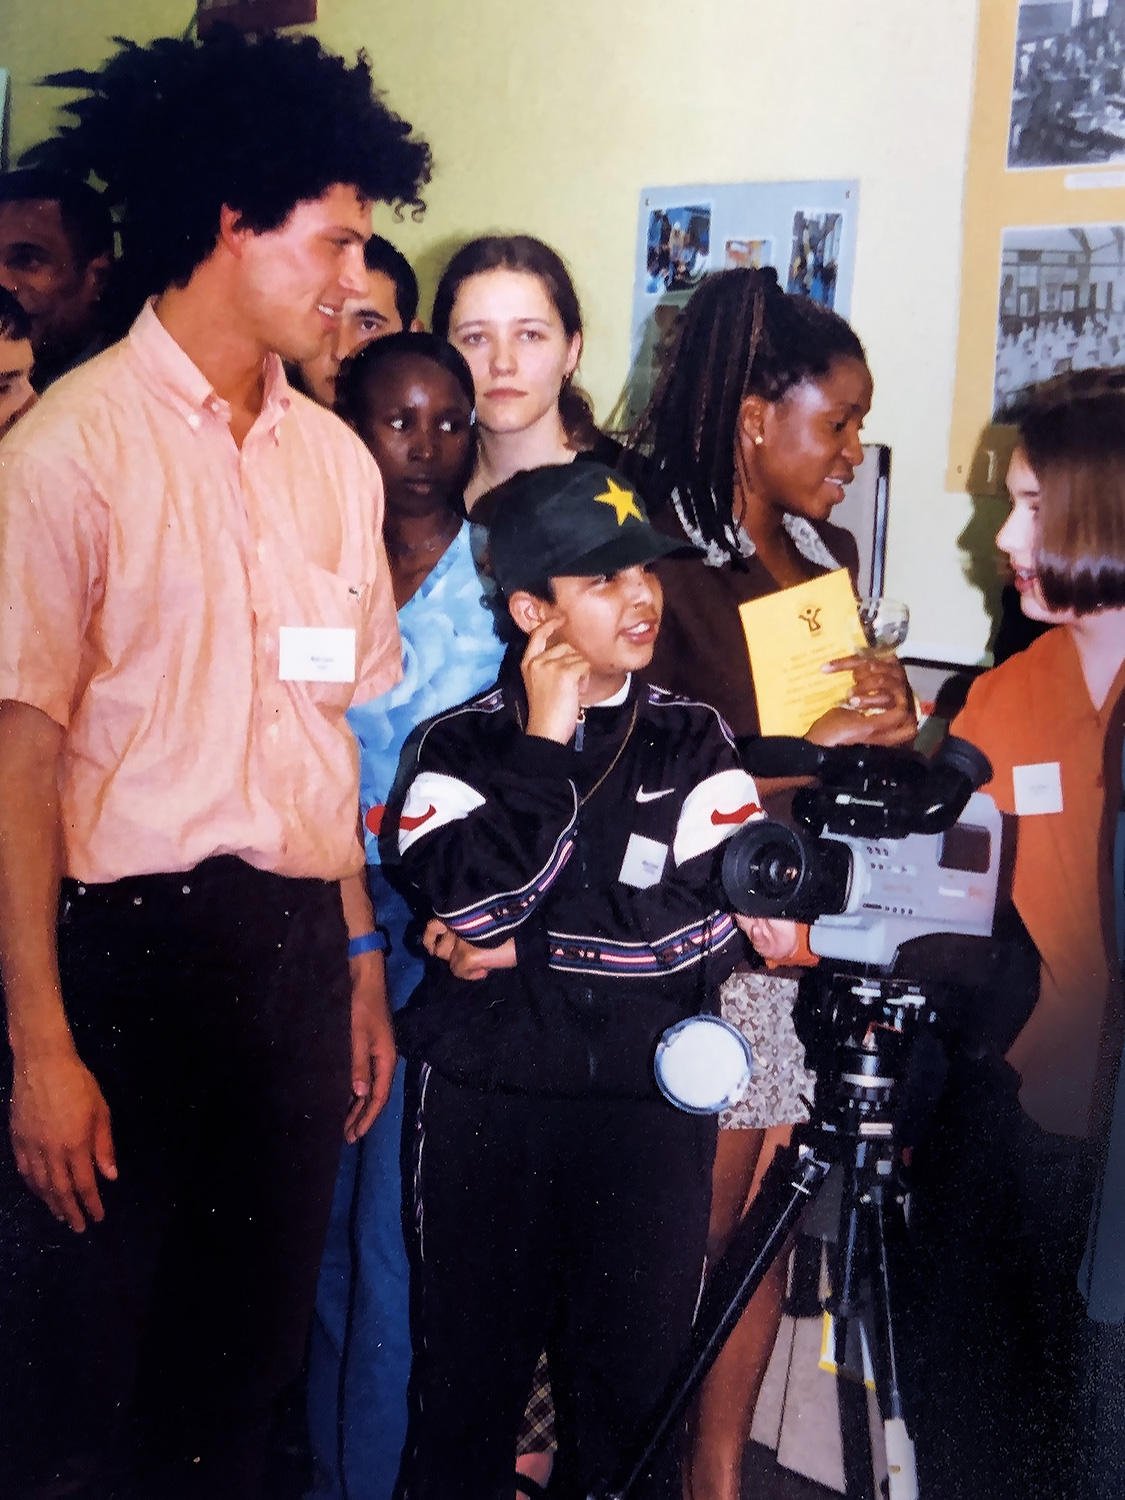 Youth work in Oxford in the 1990s